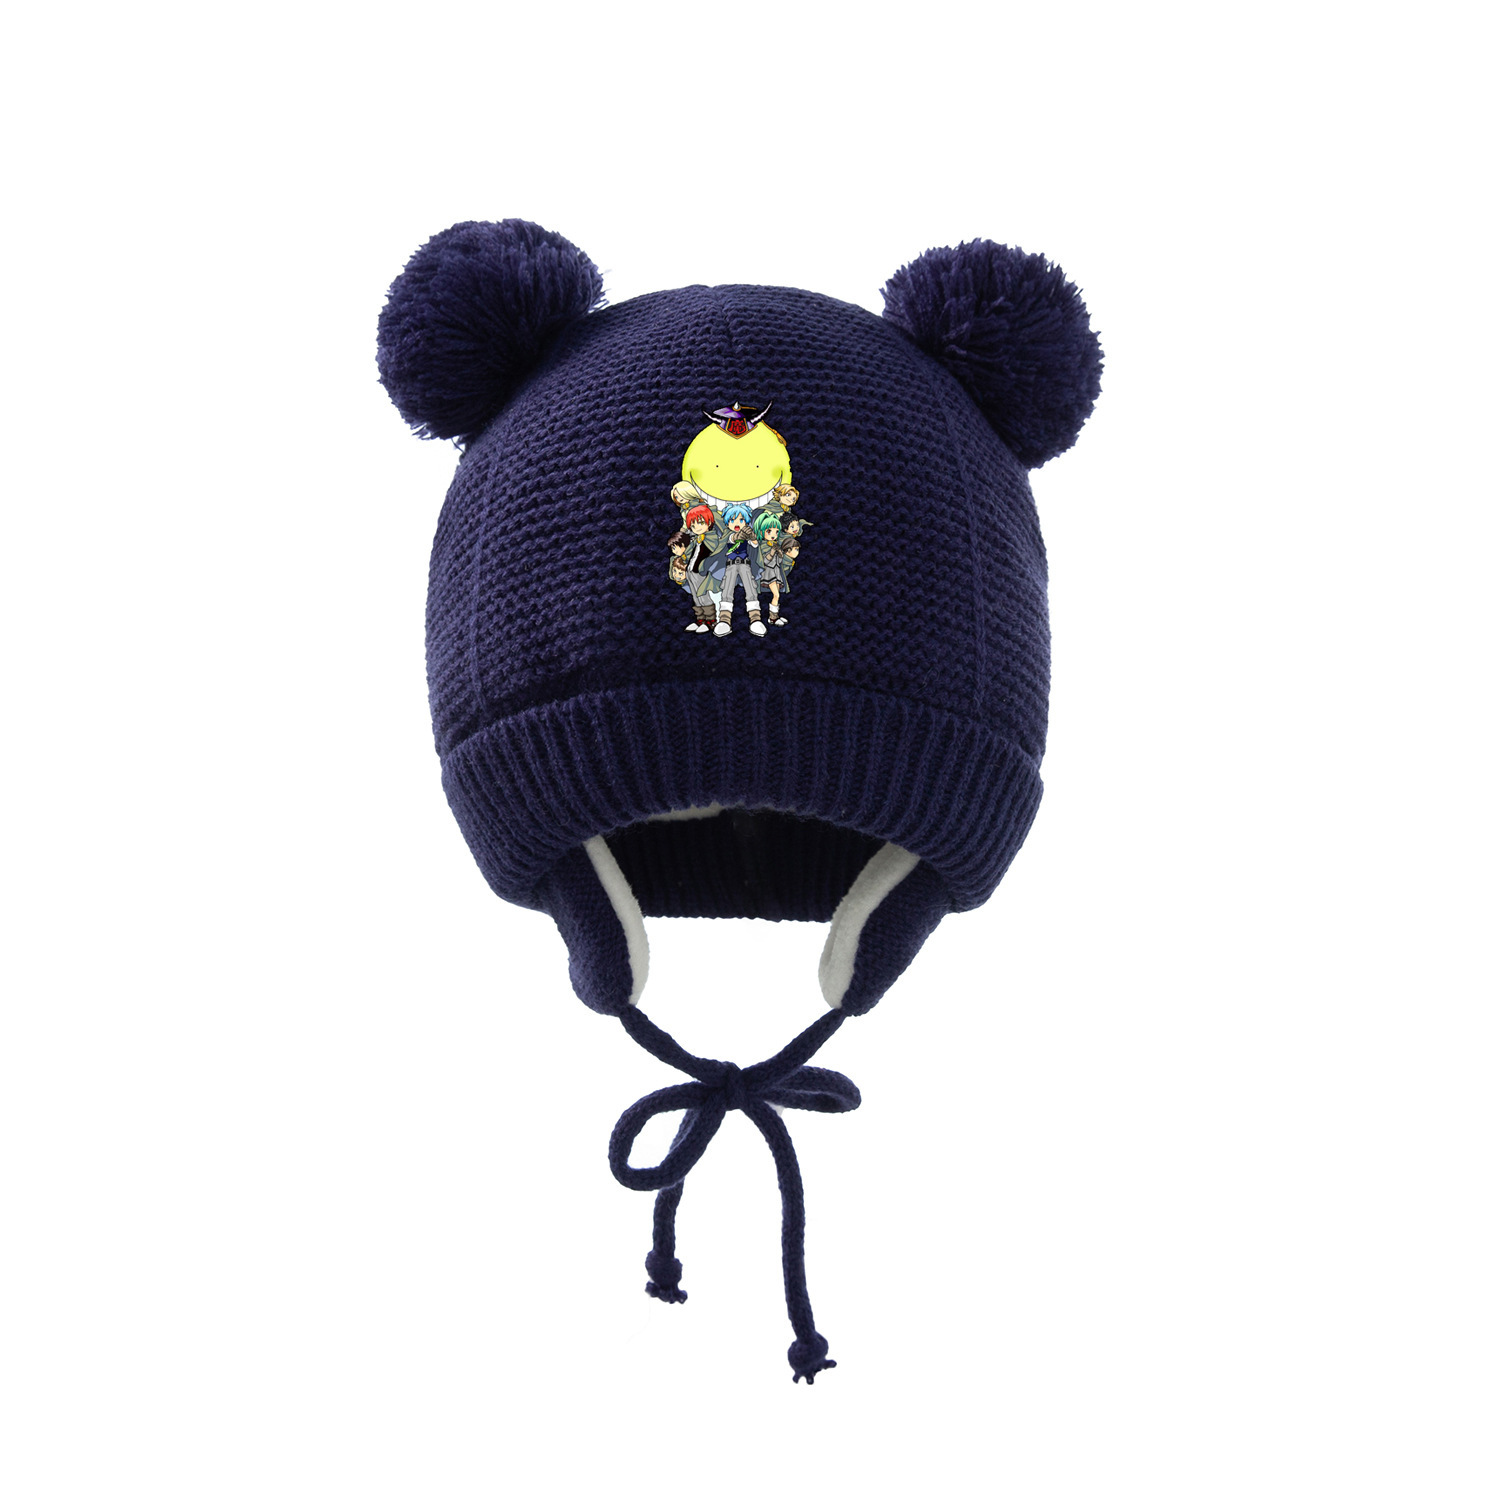 Assassination Classroom anime Knitted hat